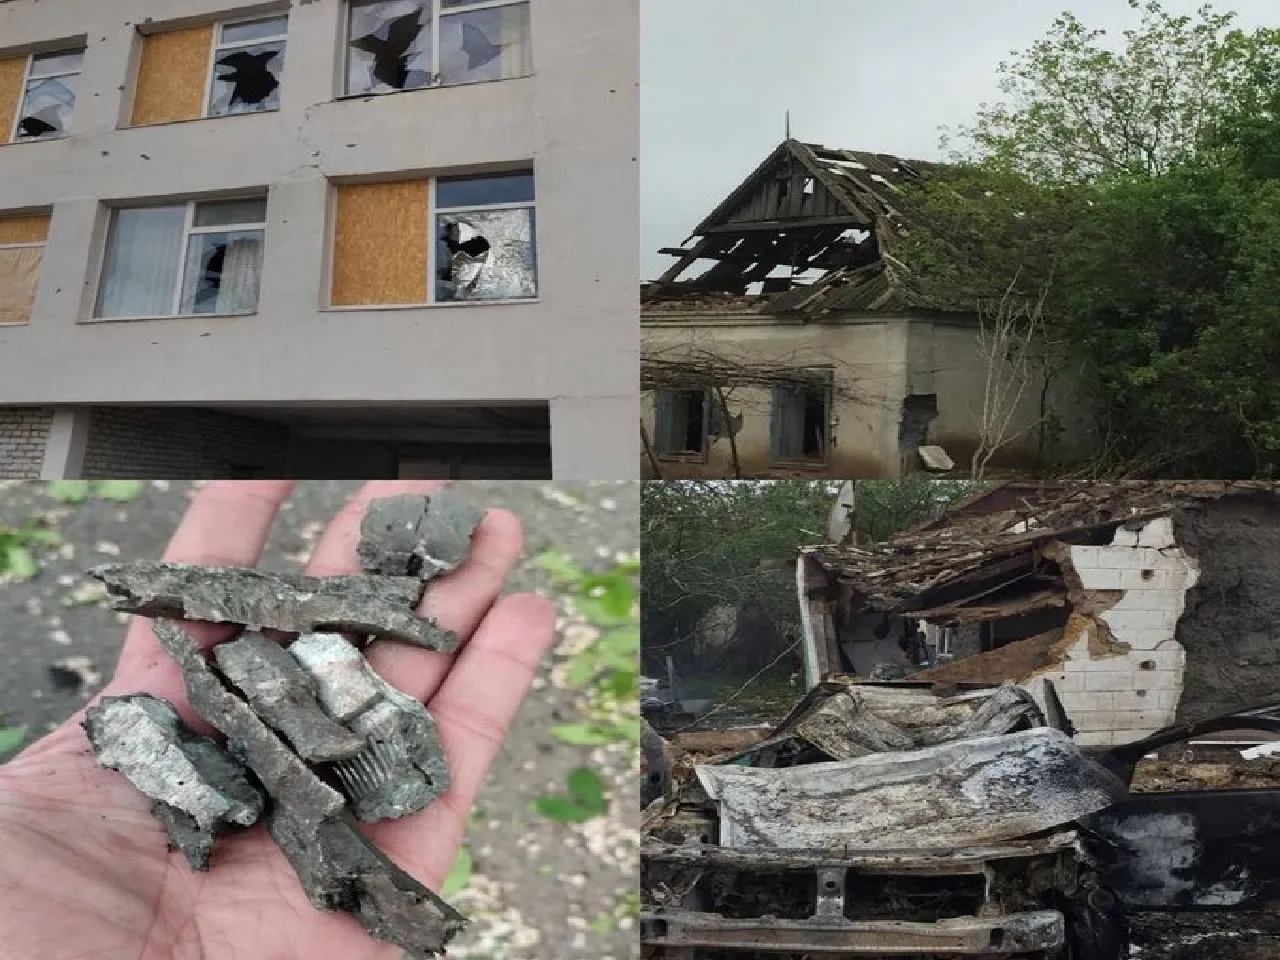 94 attacks on 20 settlements: After Bakhmut, concern grows in the region